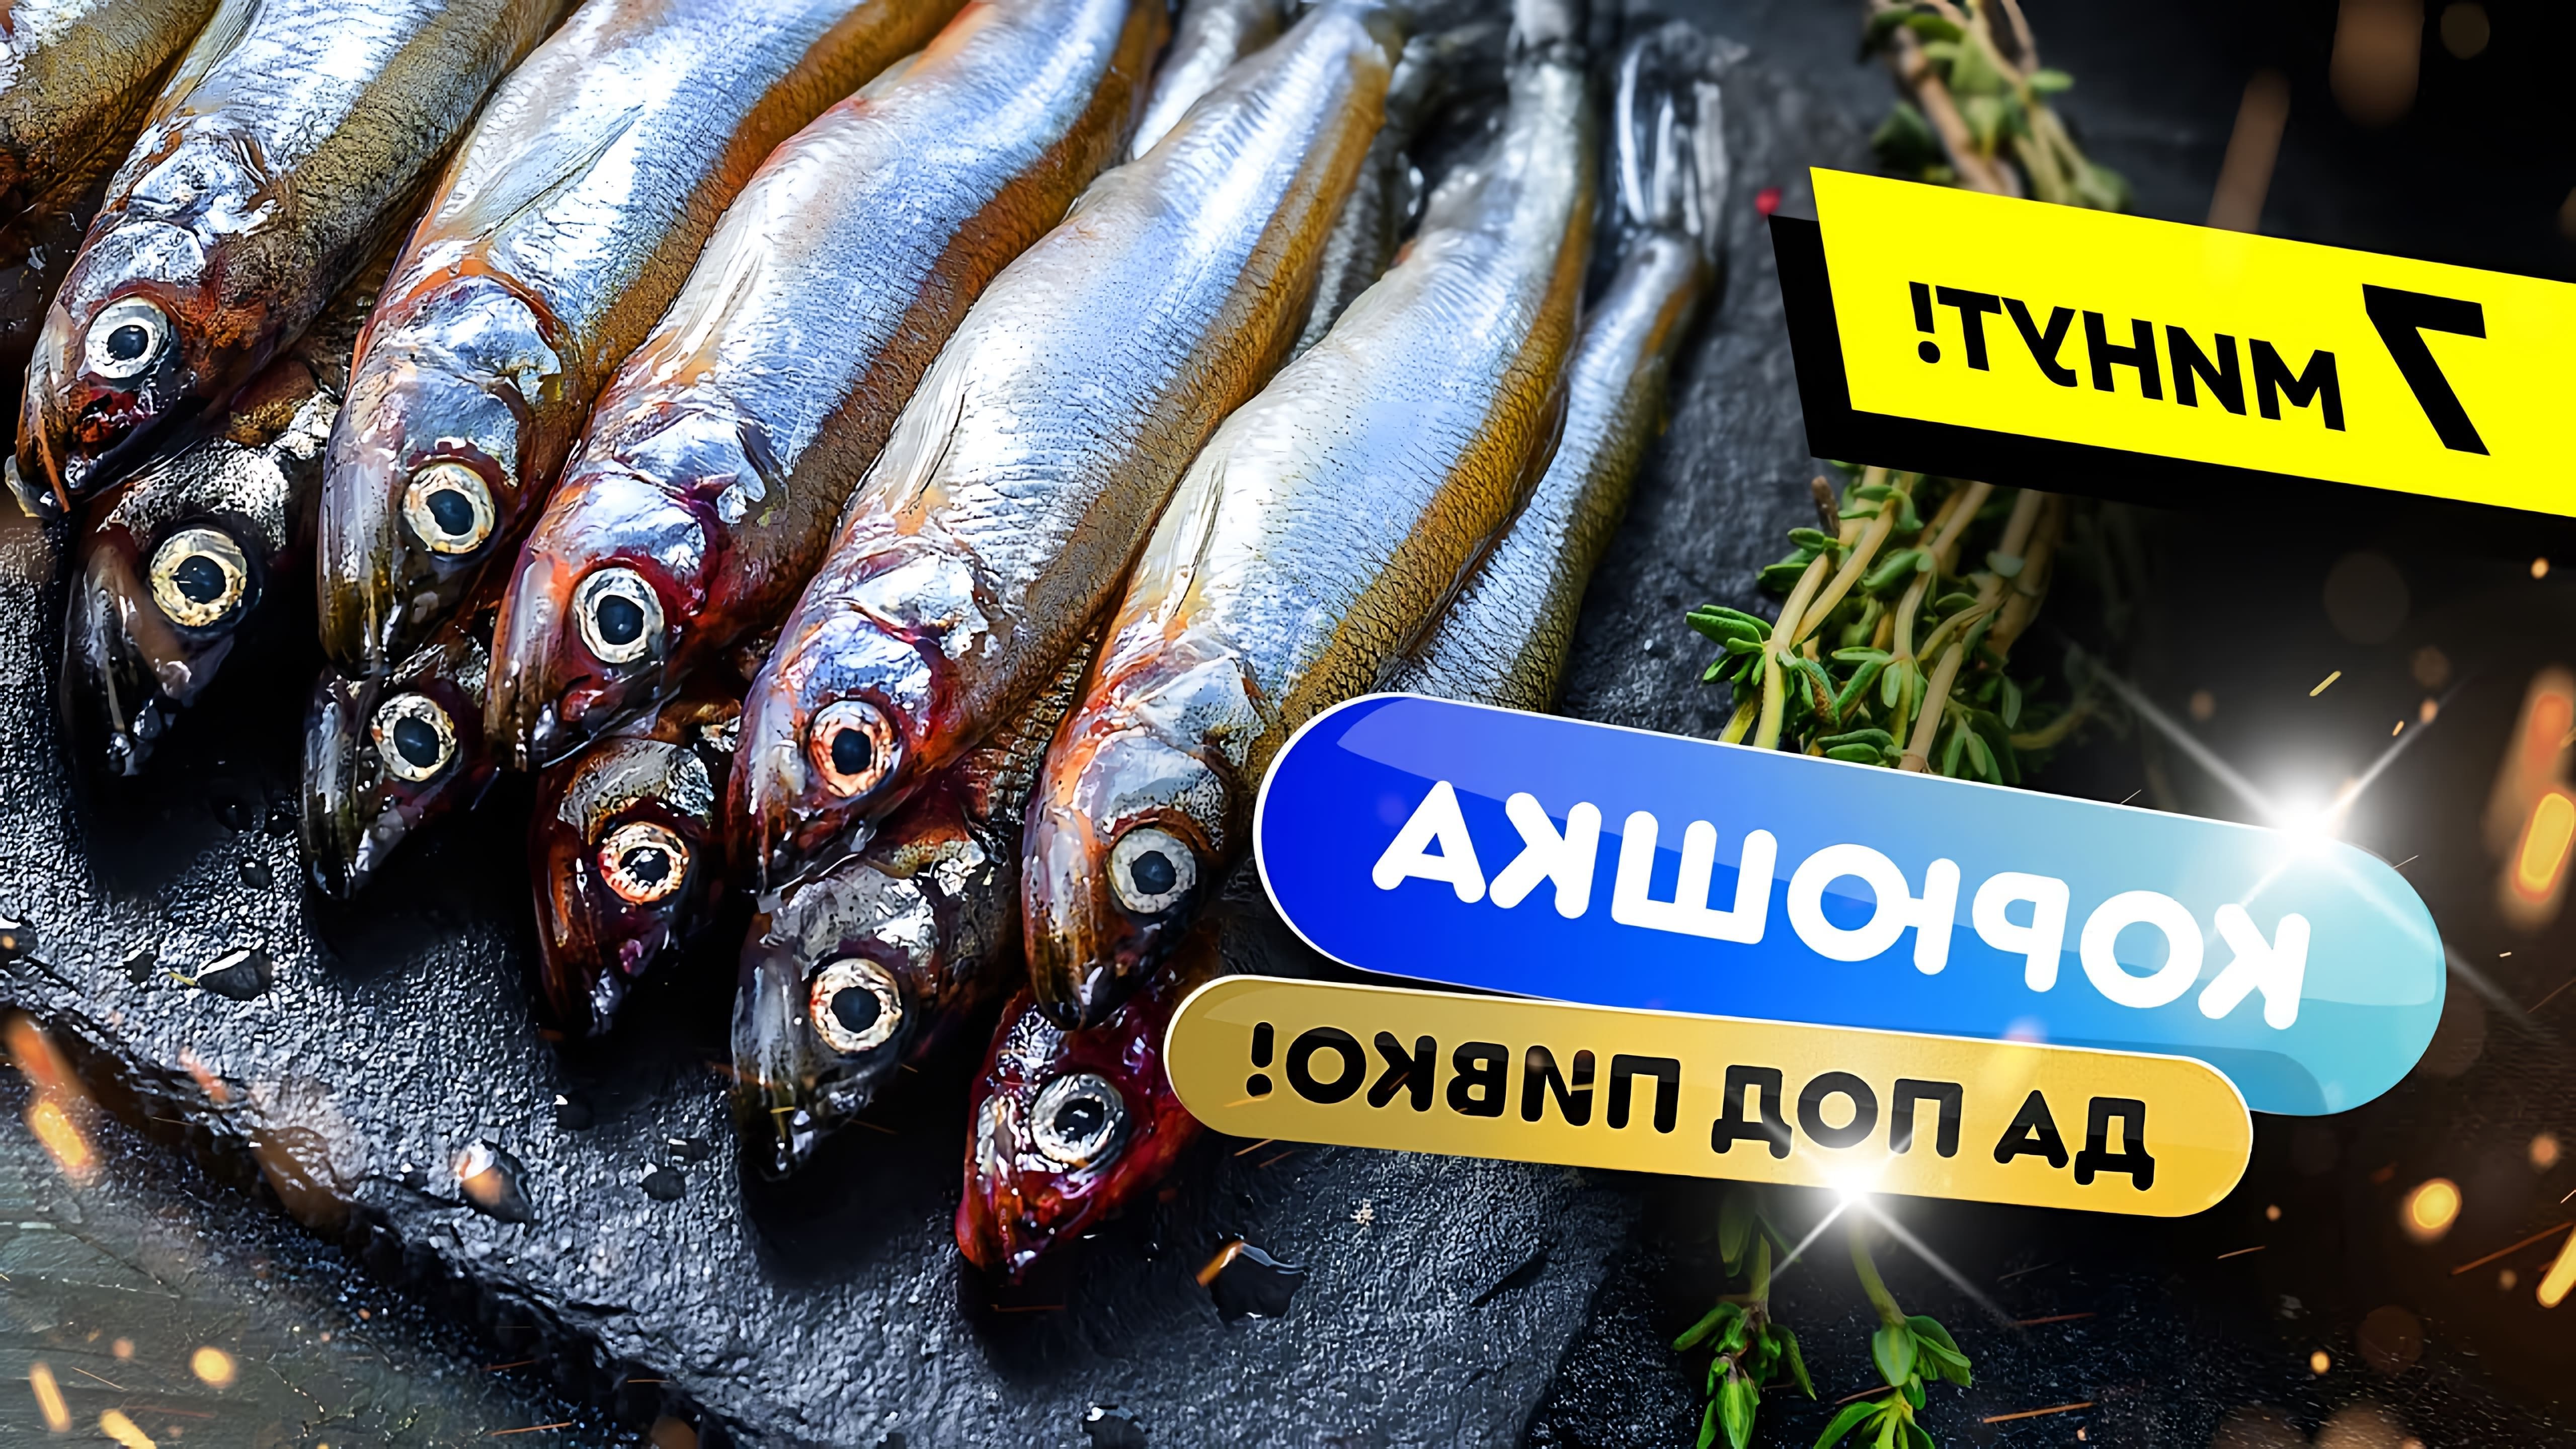 РЕШЕТКА ДЛЯ РЫБЫ: amocucinare/catalog/grill-accessories/cooking/grid-for-frying-fish-and-vegetables-big/?fish... 